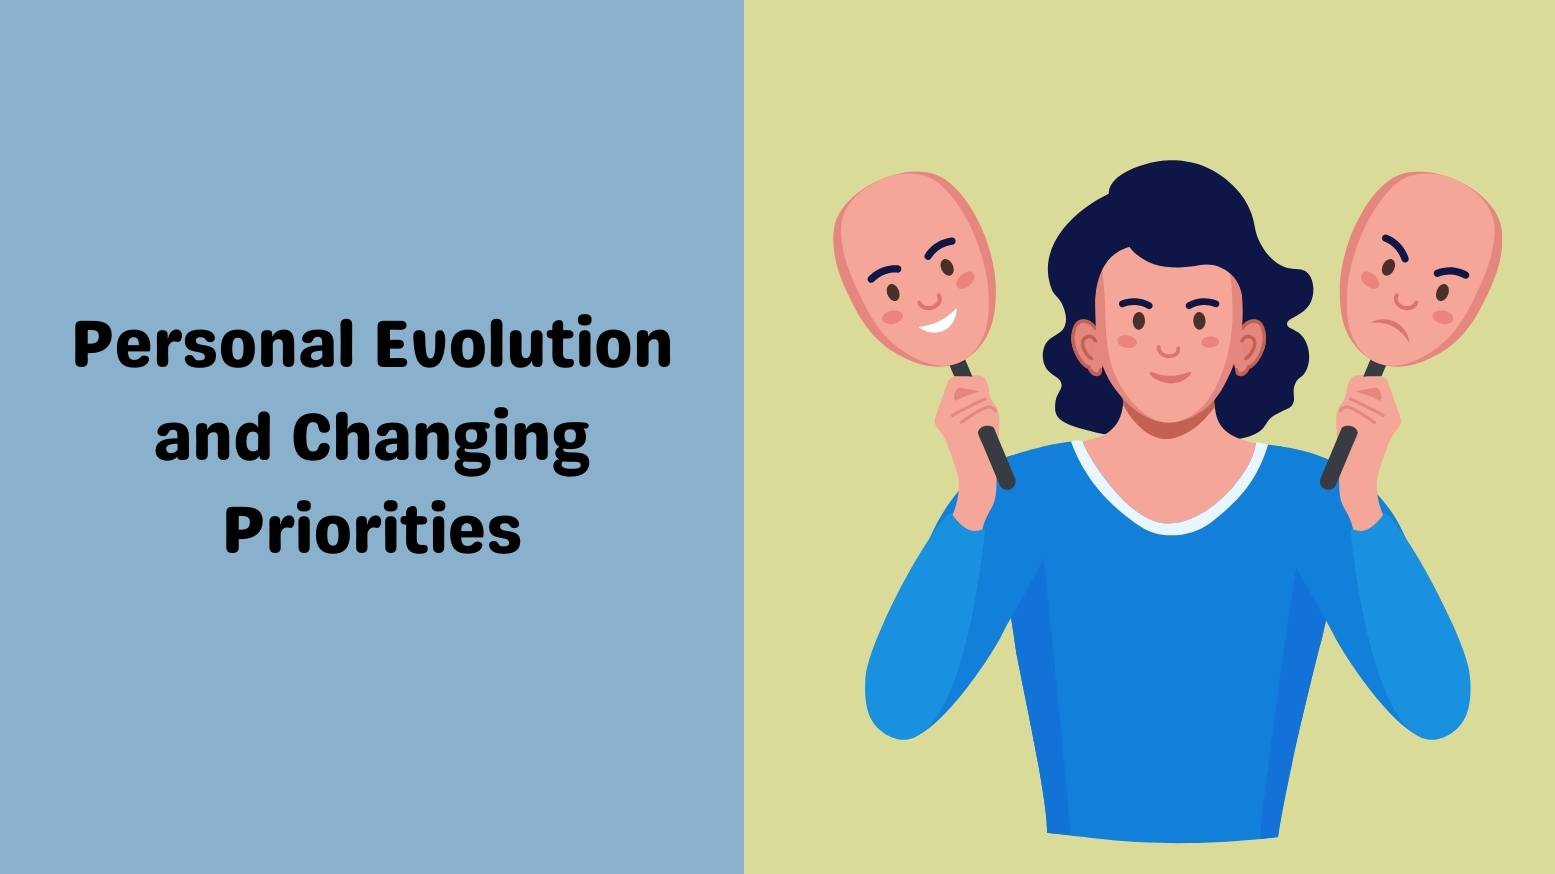 Personal Evolution and Changing Priorities